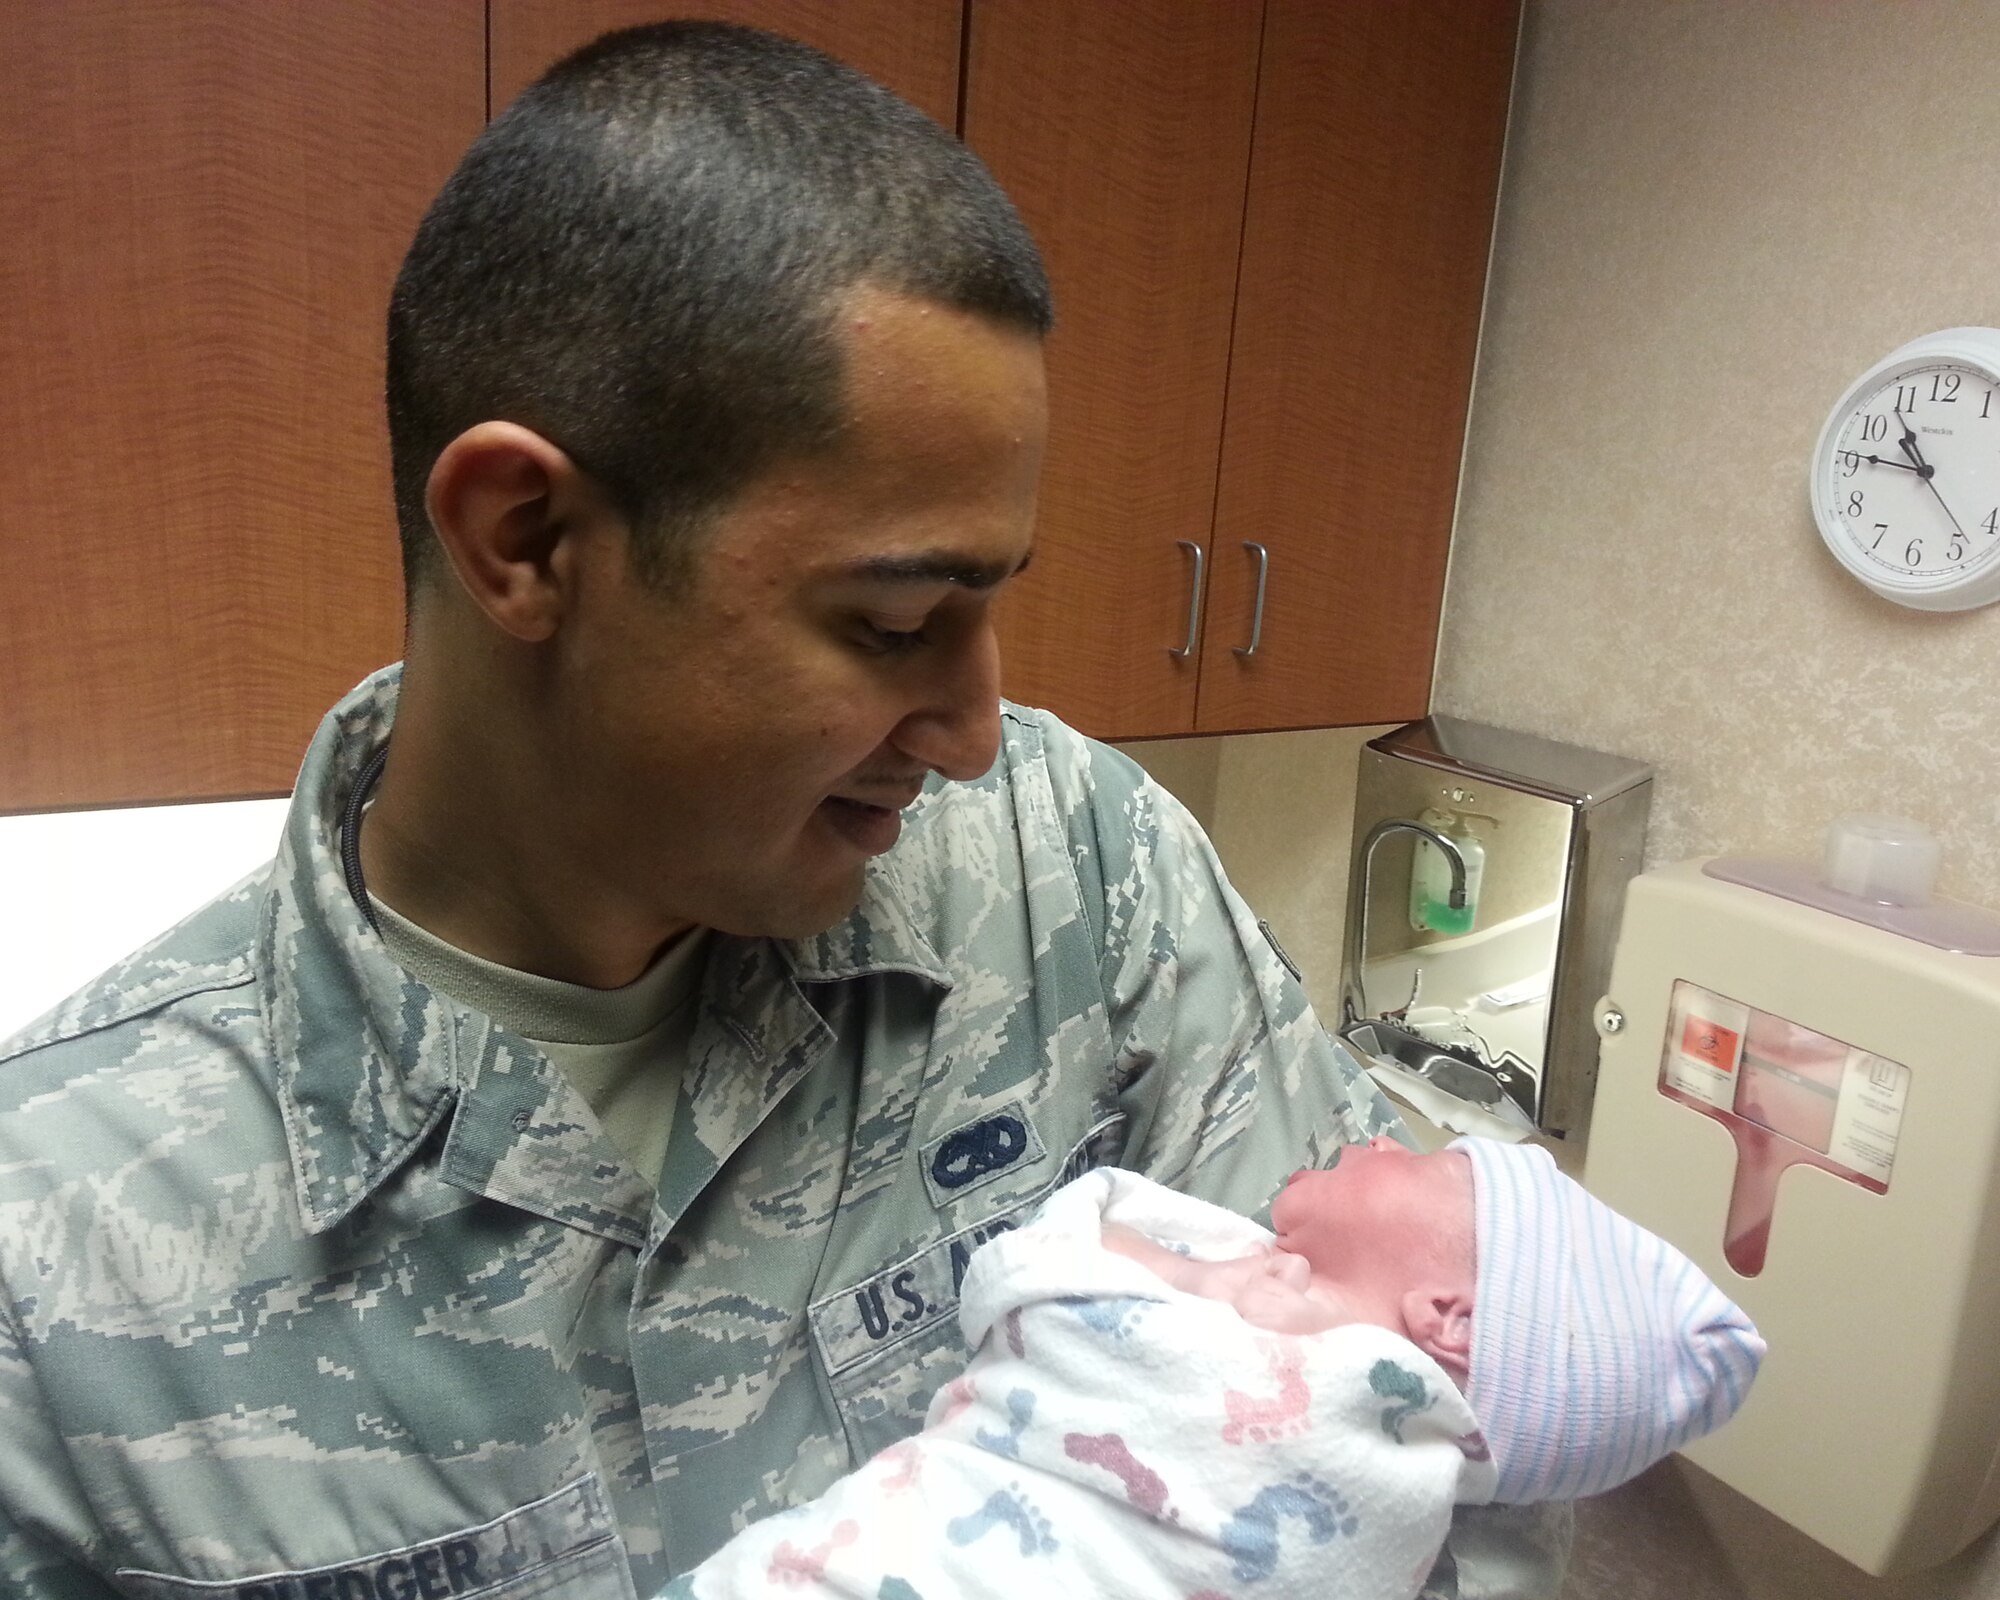 Airman 1st Class Timothy Pledger holds his daughter, Zoey, hours after delivering her himself Aug. 30, 2013. Pledger’s flight to deploy to Guam had been delayed so he went home to be with his pregnant wife. Not long after he came home, she went into labor. In less than an hour, Pledger and his wife welcomed their new baby girl into the family. Pledger is an electronic warfare journeyman with the 20th Aircraft Maintenance Unit. (Courtesy photo)